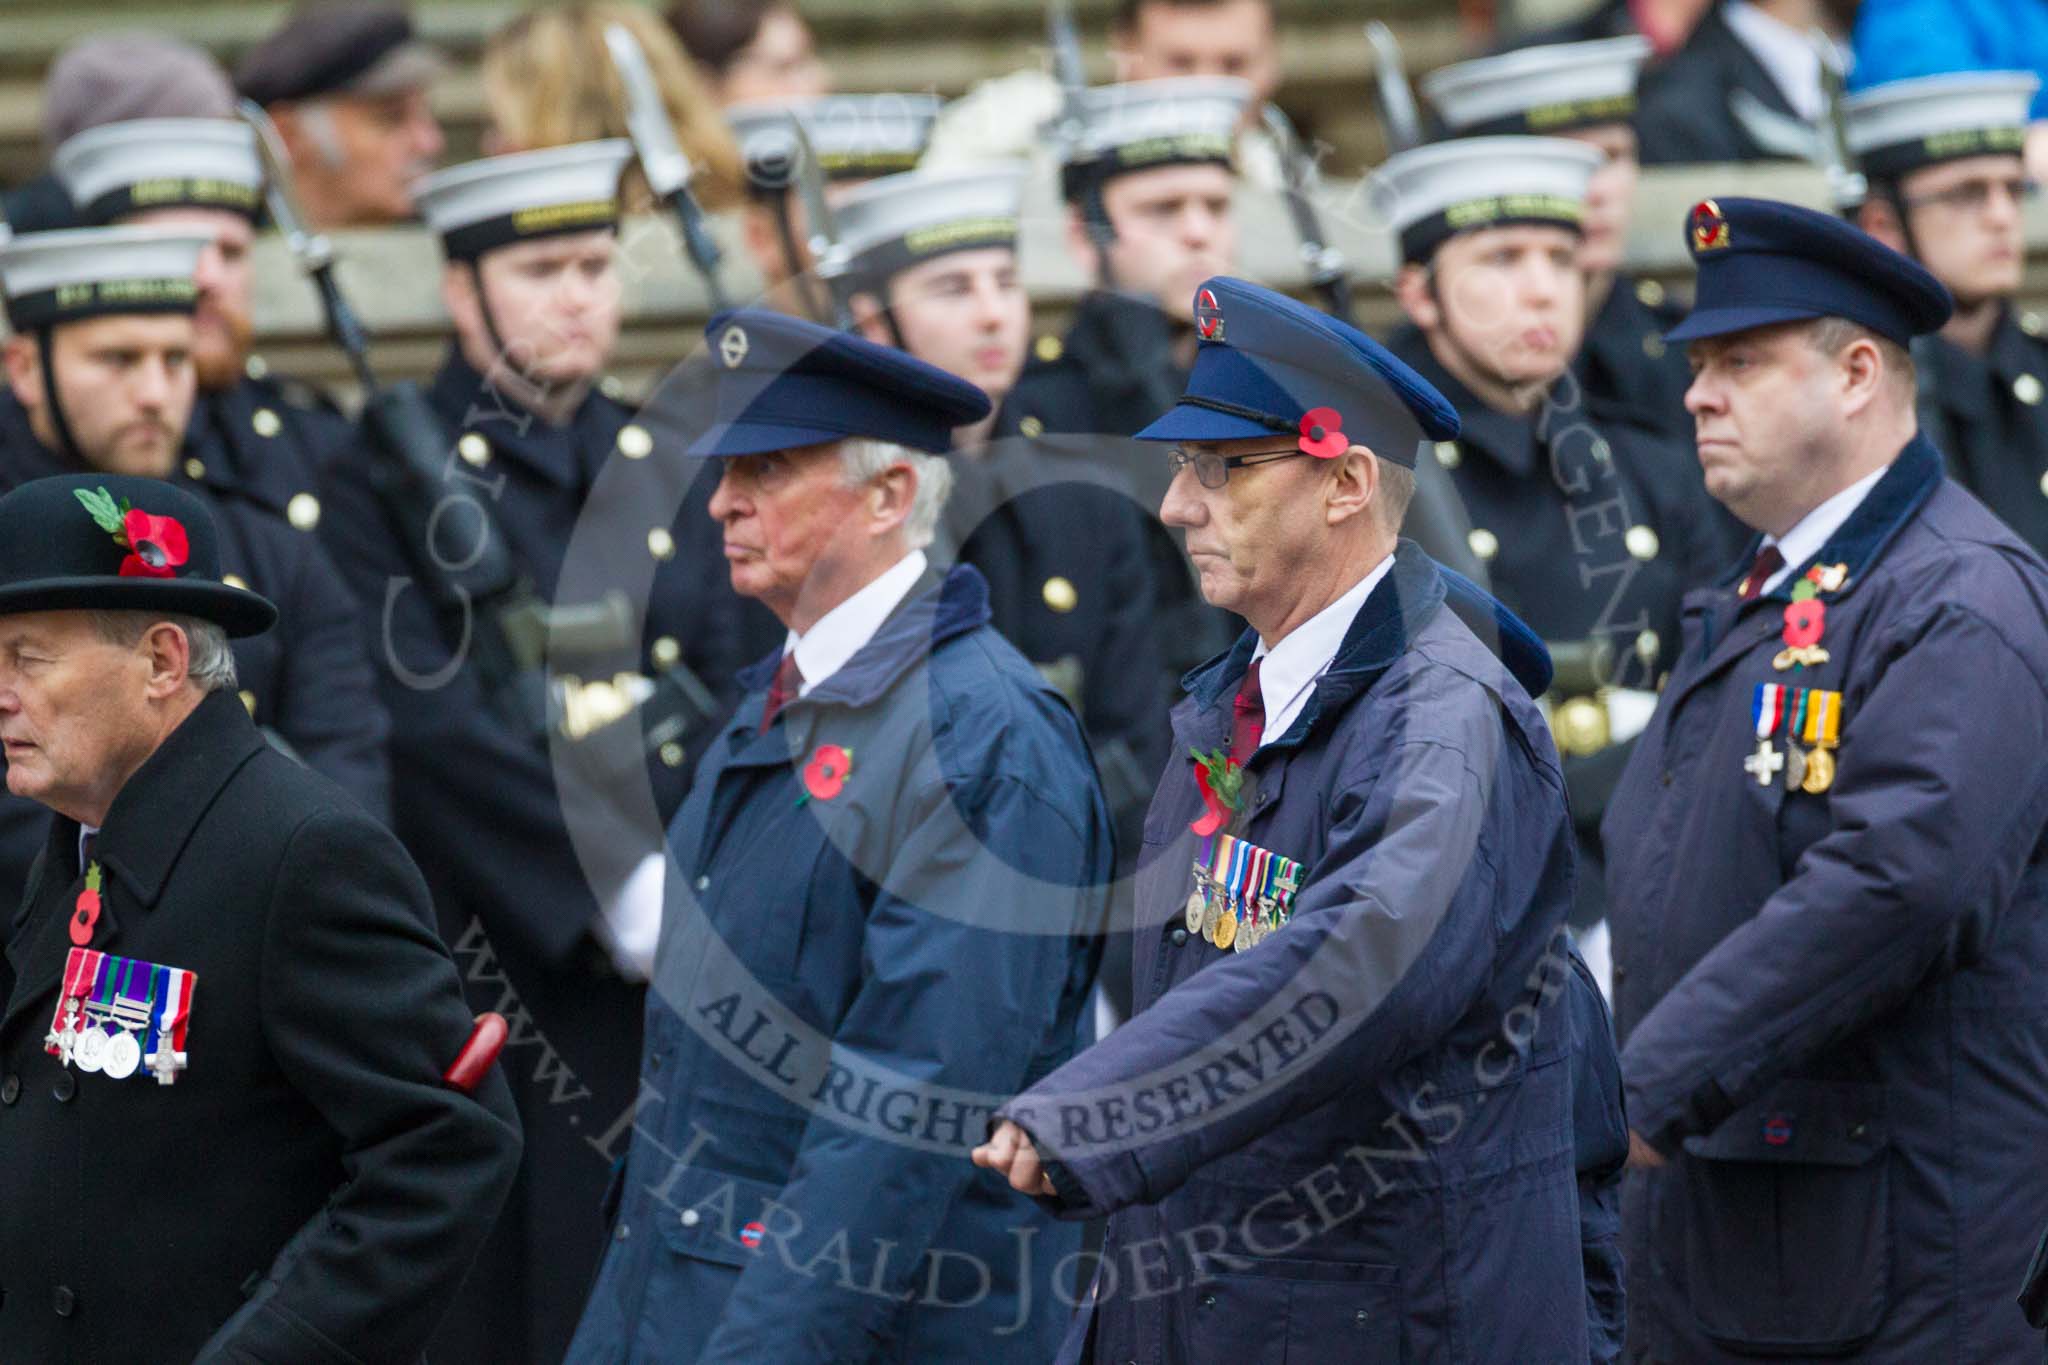 Remembrance Sunday at the Cenotaph 2015: Group M1, Transport for London.
Cenotaph, Whitehall, London SW1,
London,
Greater London,
United Kingdom,
on 08 November 2015 at 12:14, image #1413